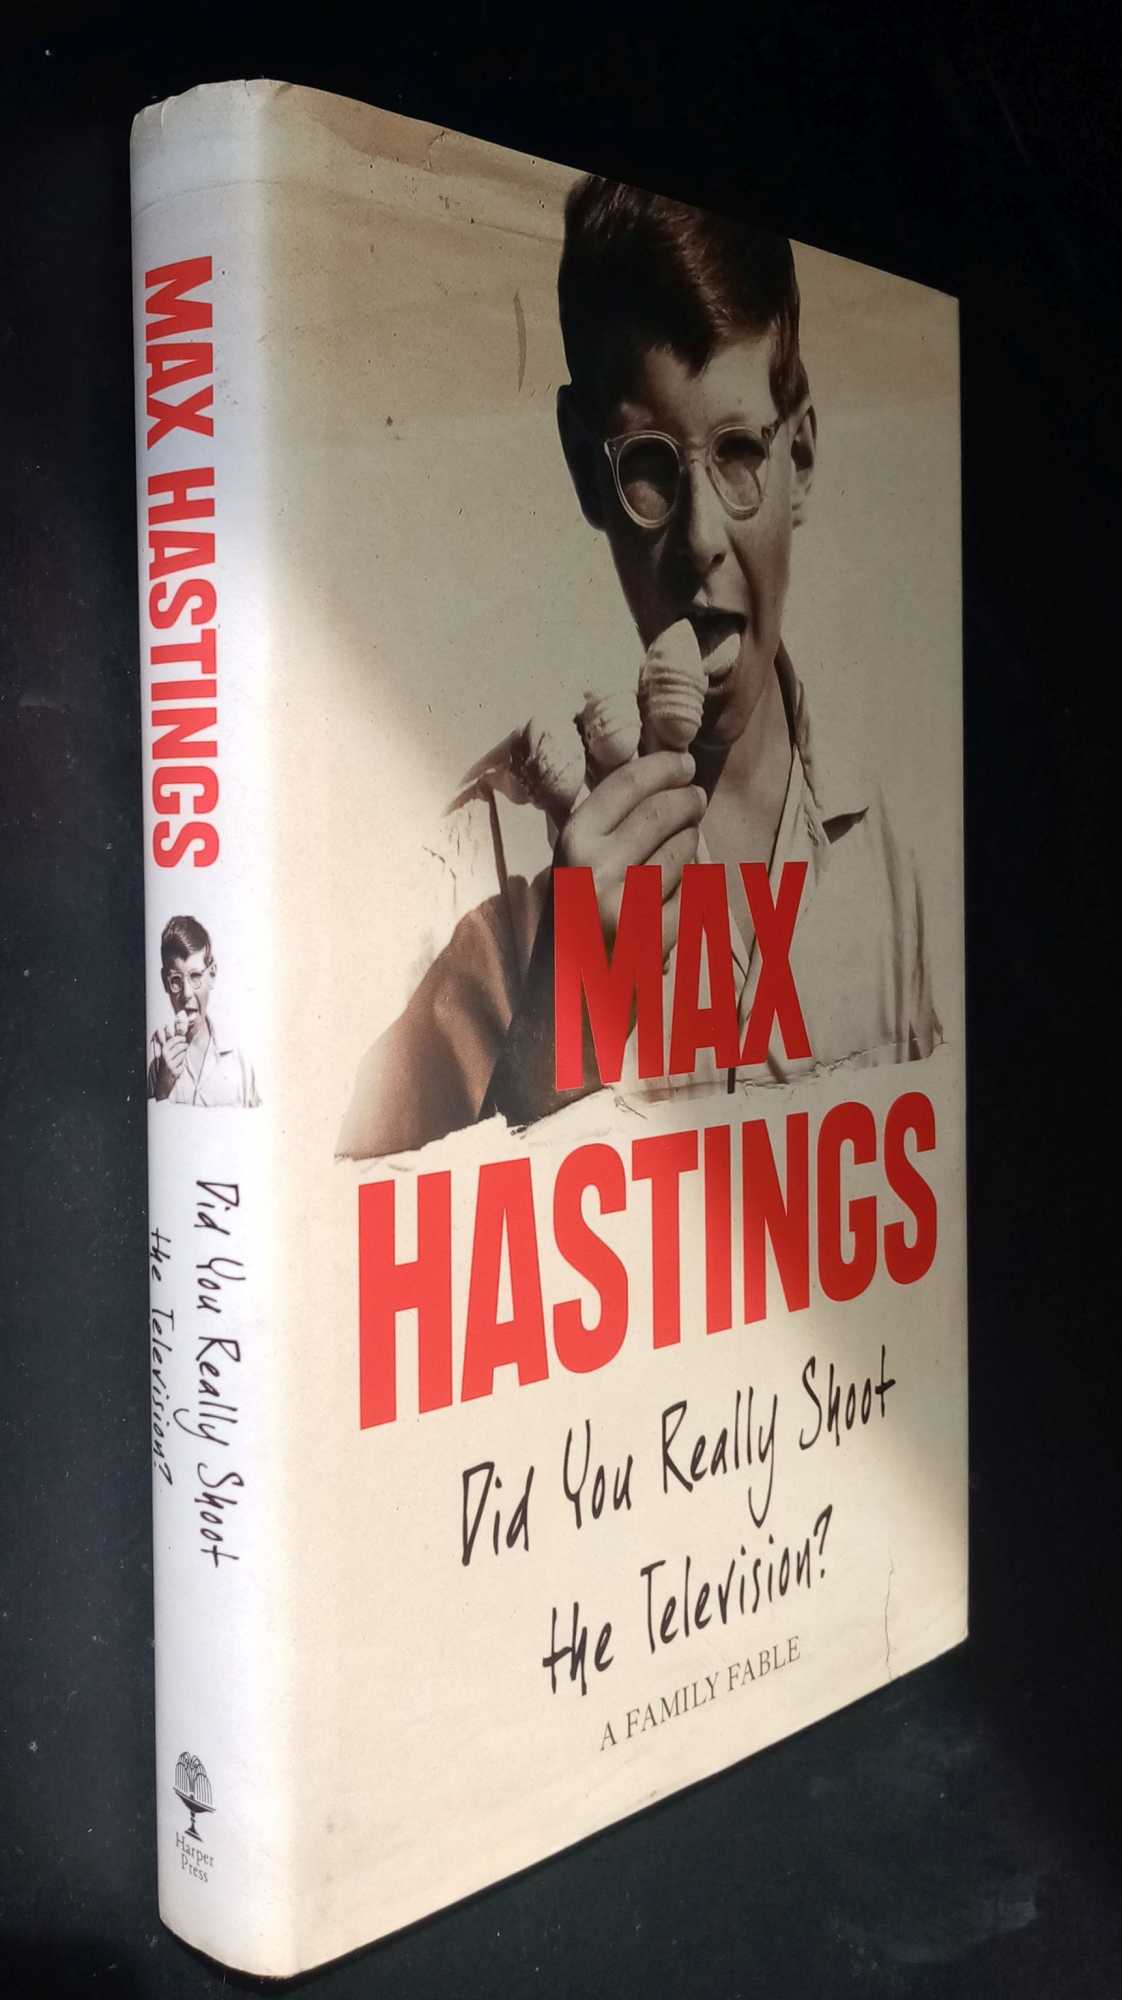 Max Hastings - Did You Really Shoot the Television?: A Family Fable  SIGNED/Inscribed